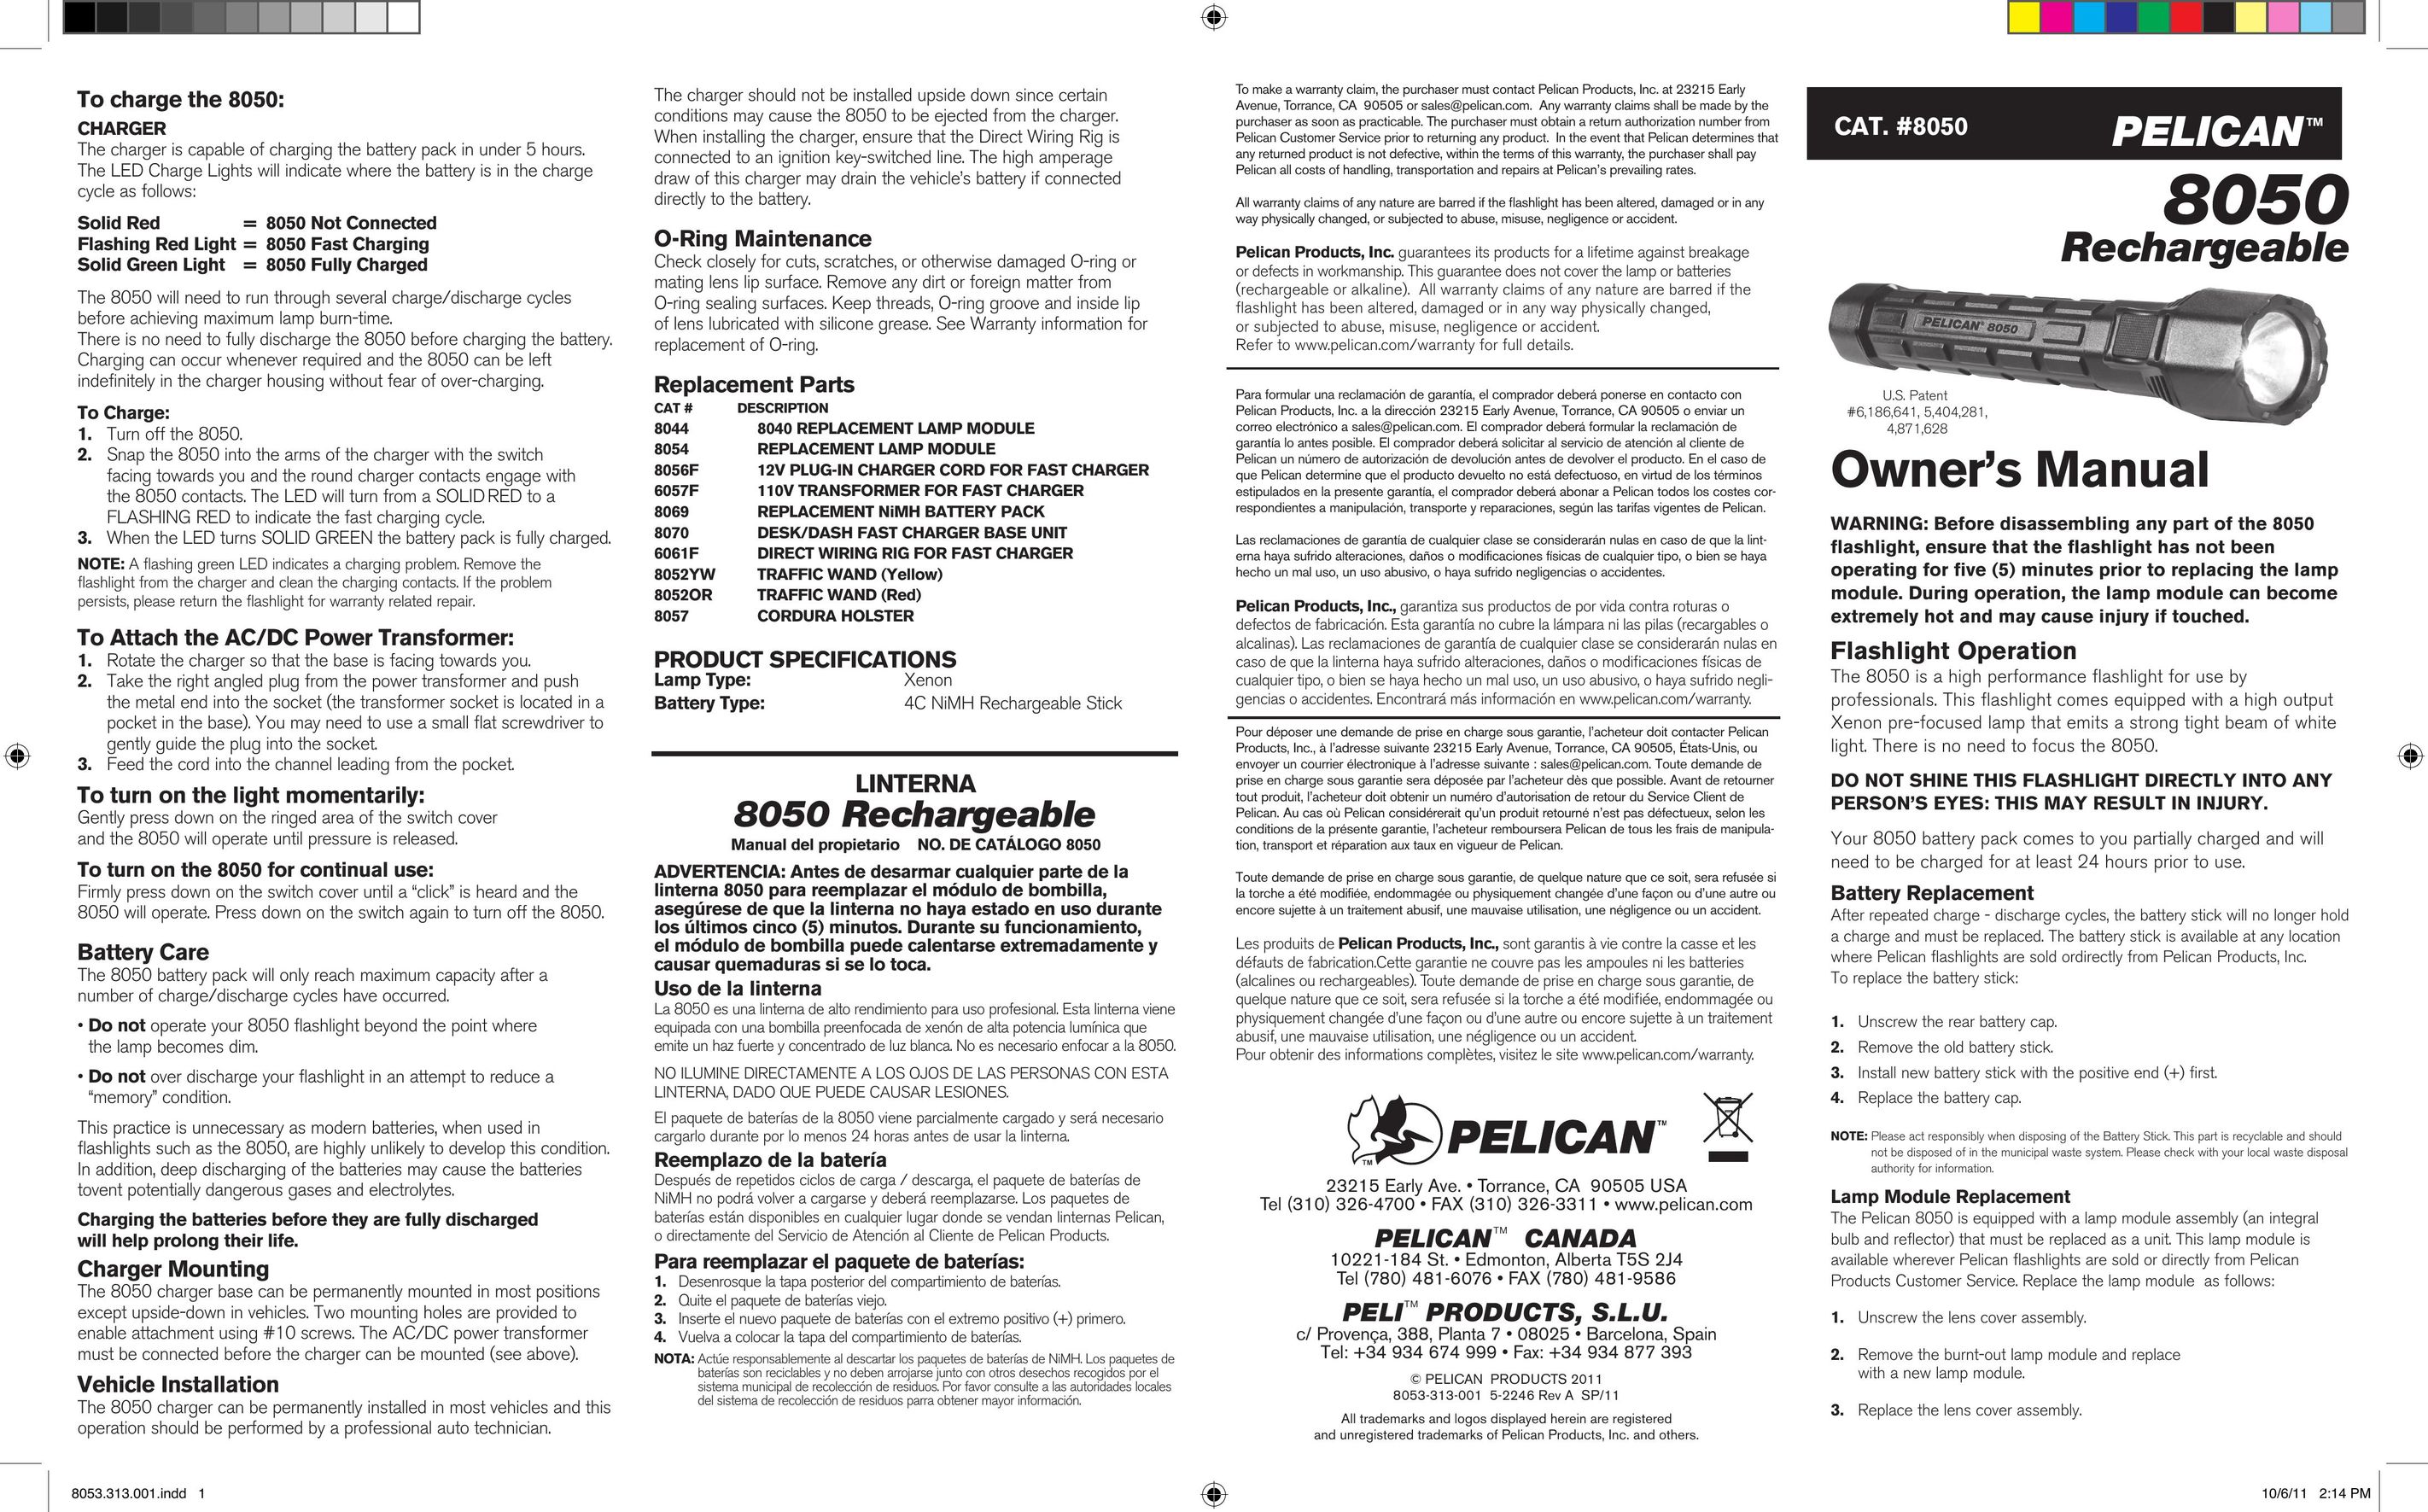 Pelican 8050 Home Safety Product User Manual